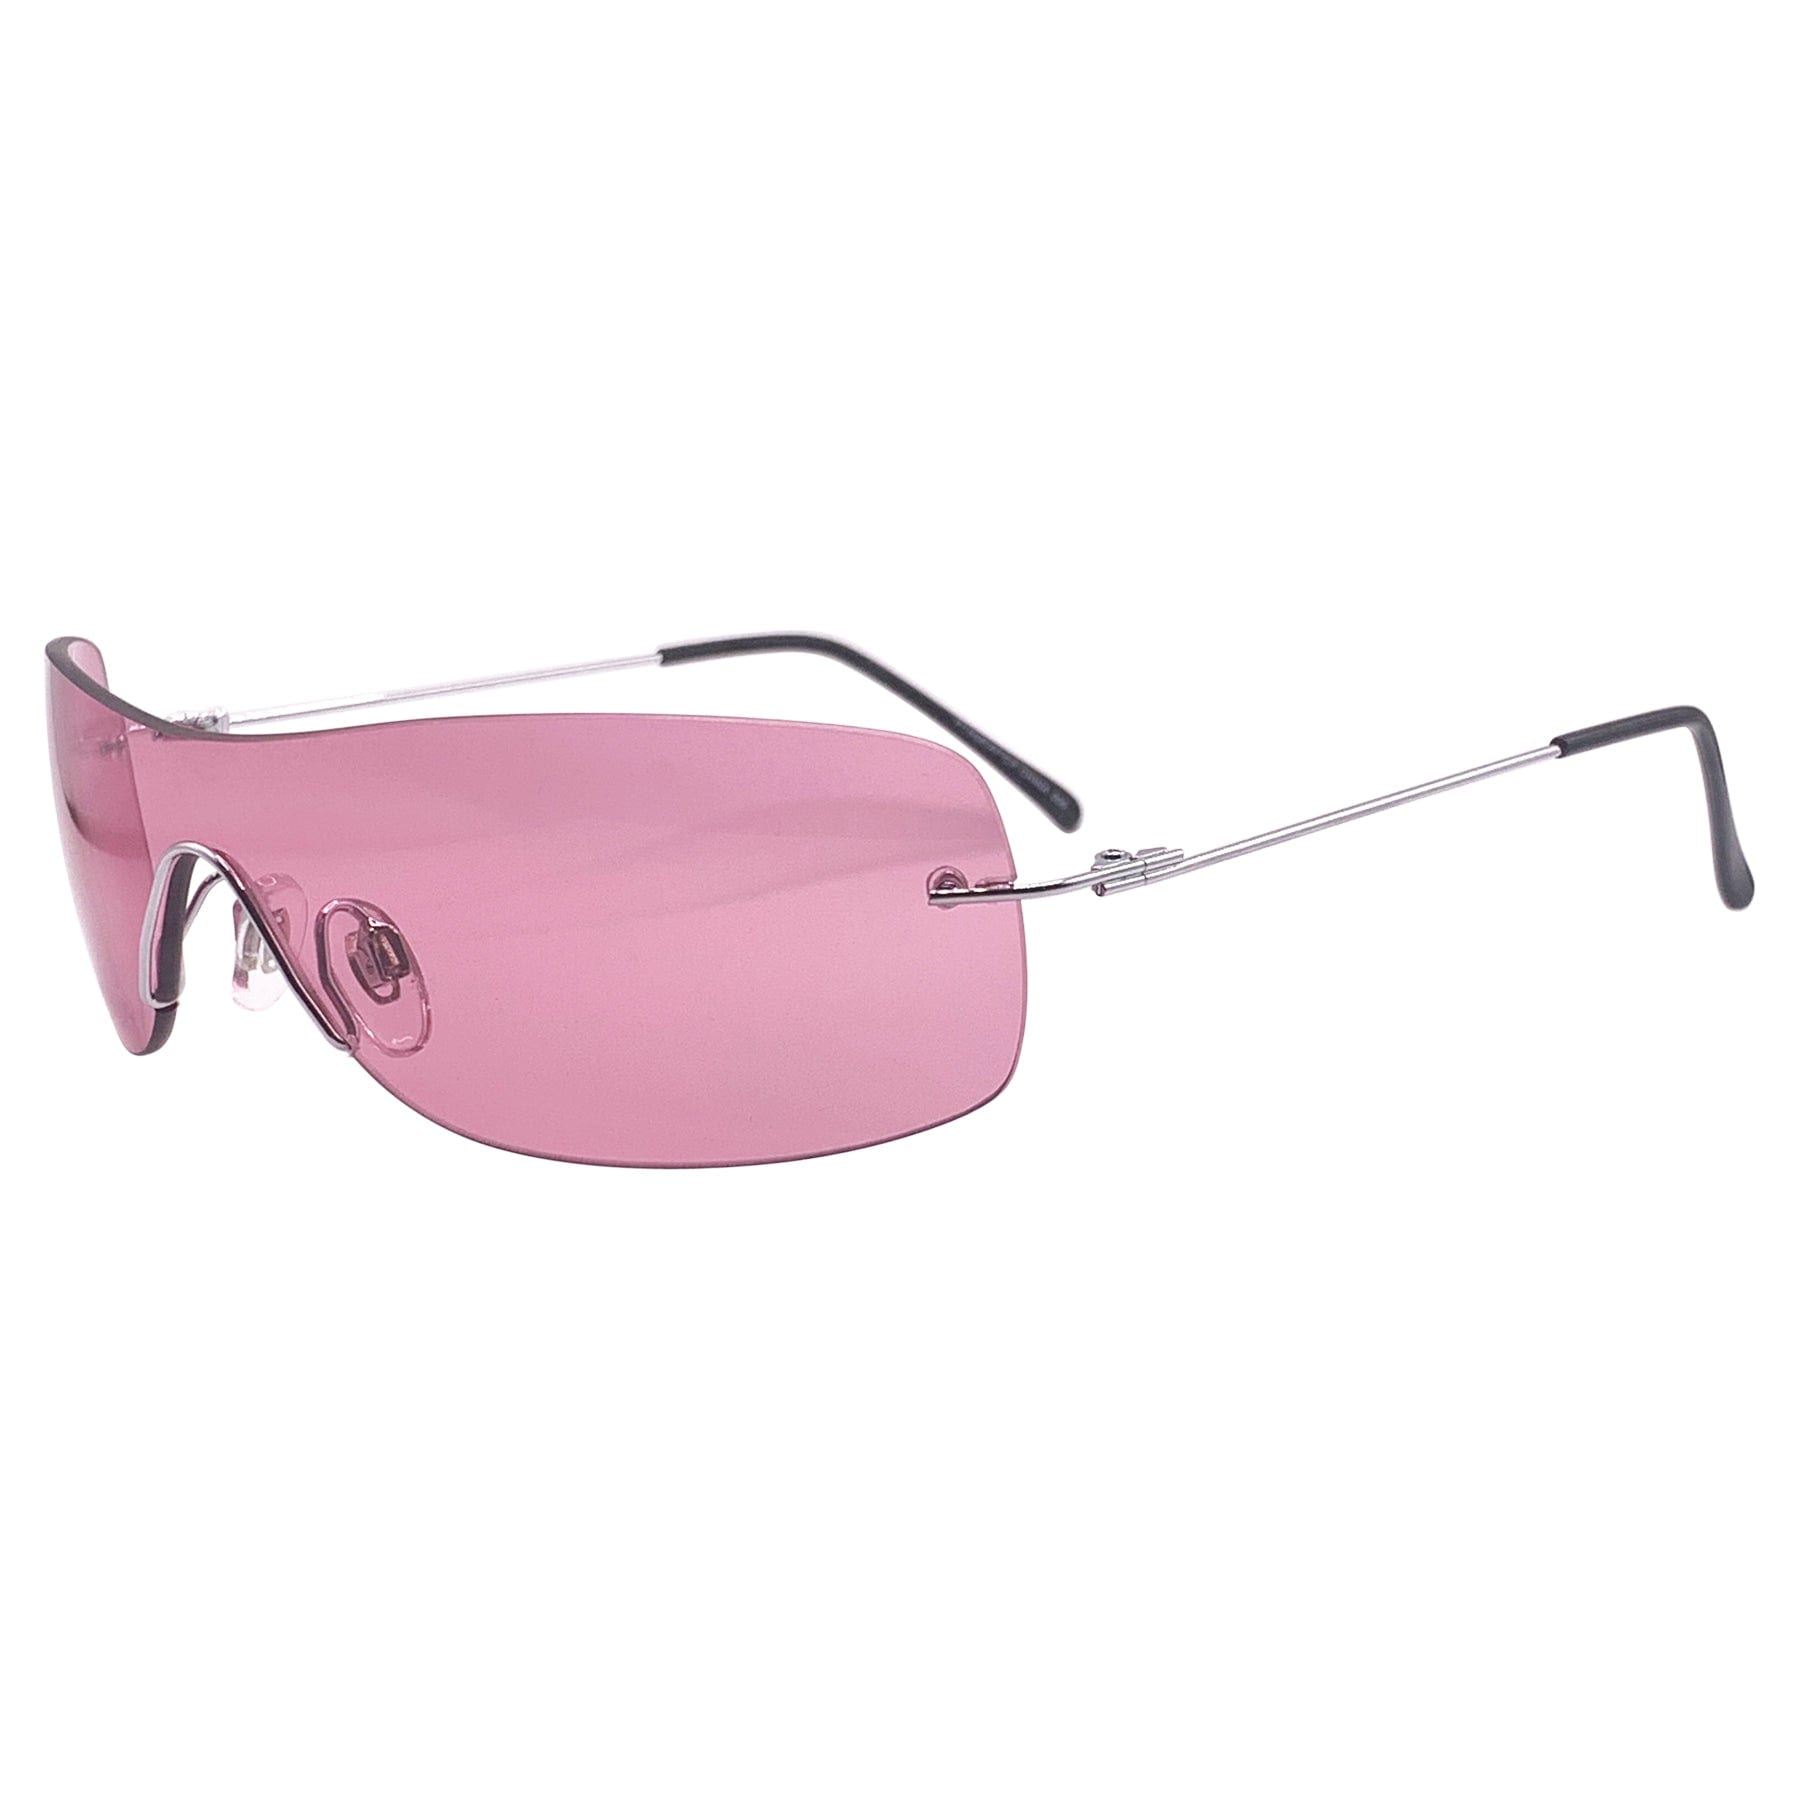 2000s sunglasses with a pink lens and rimless metal frame 